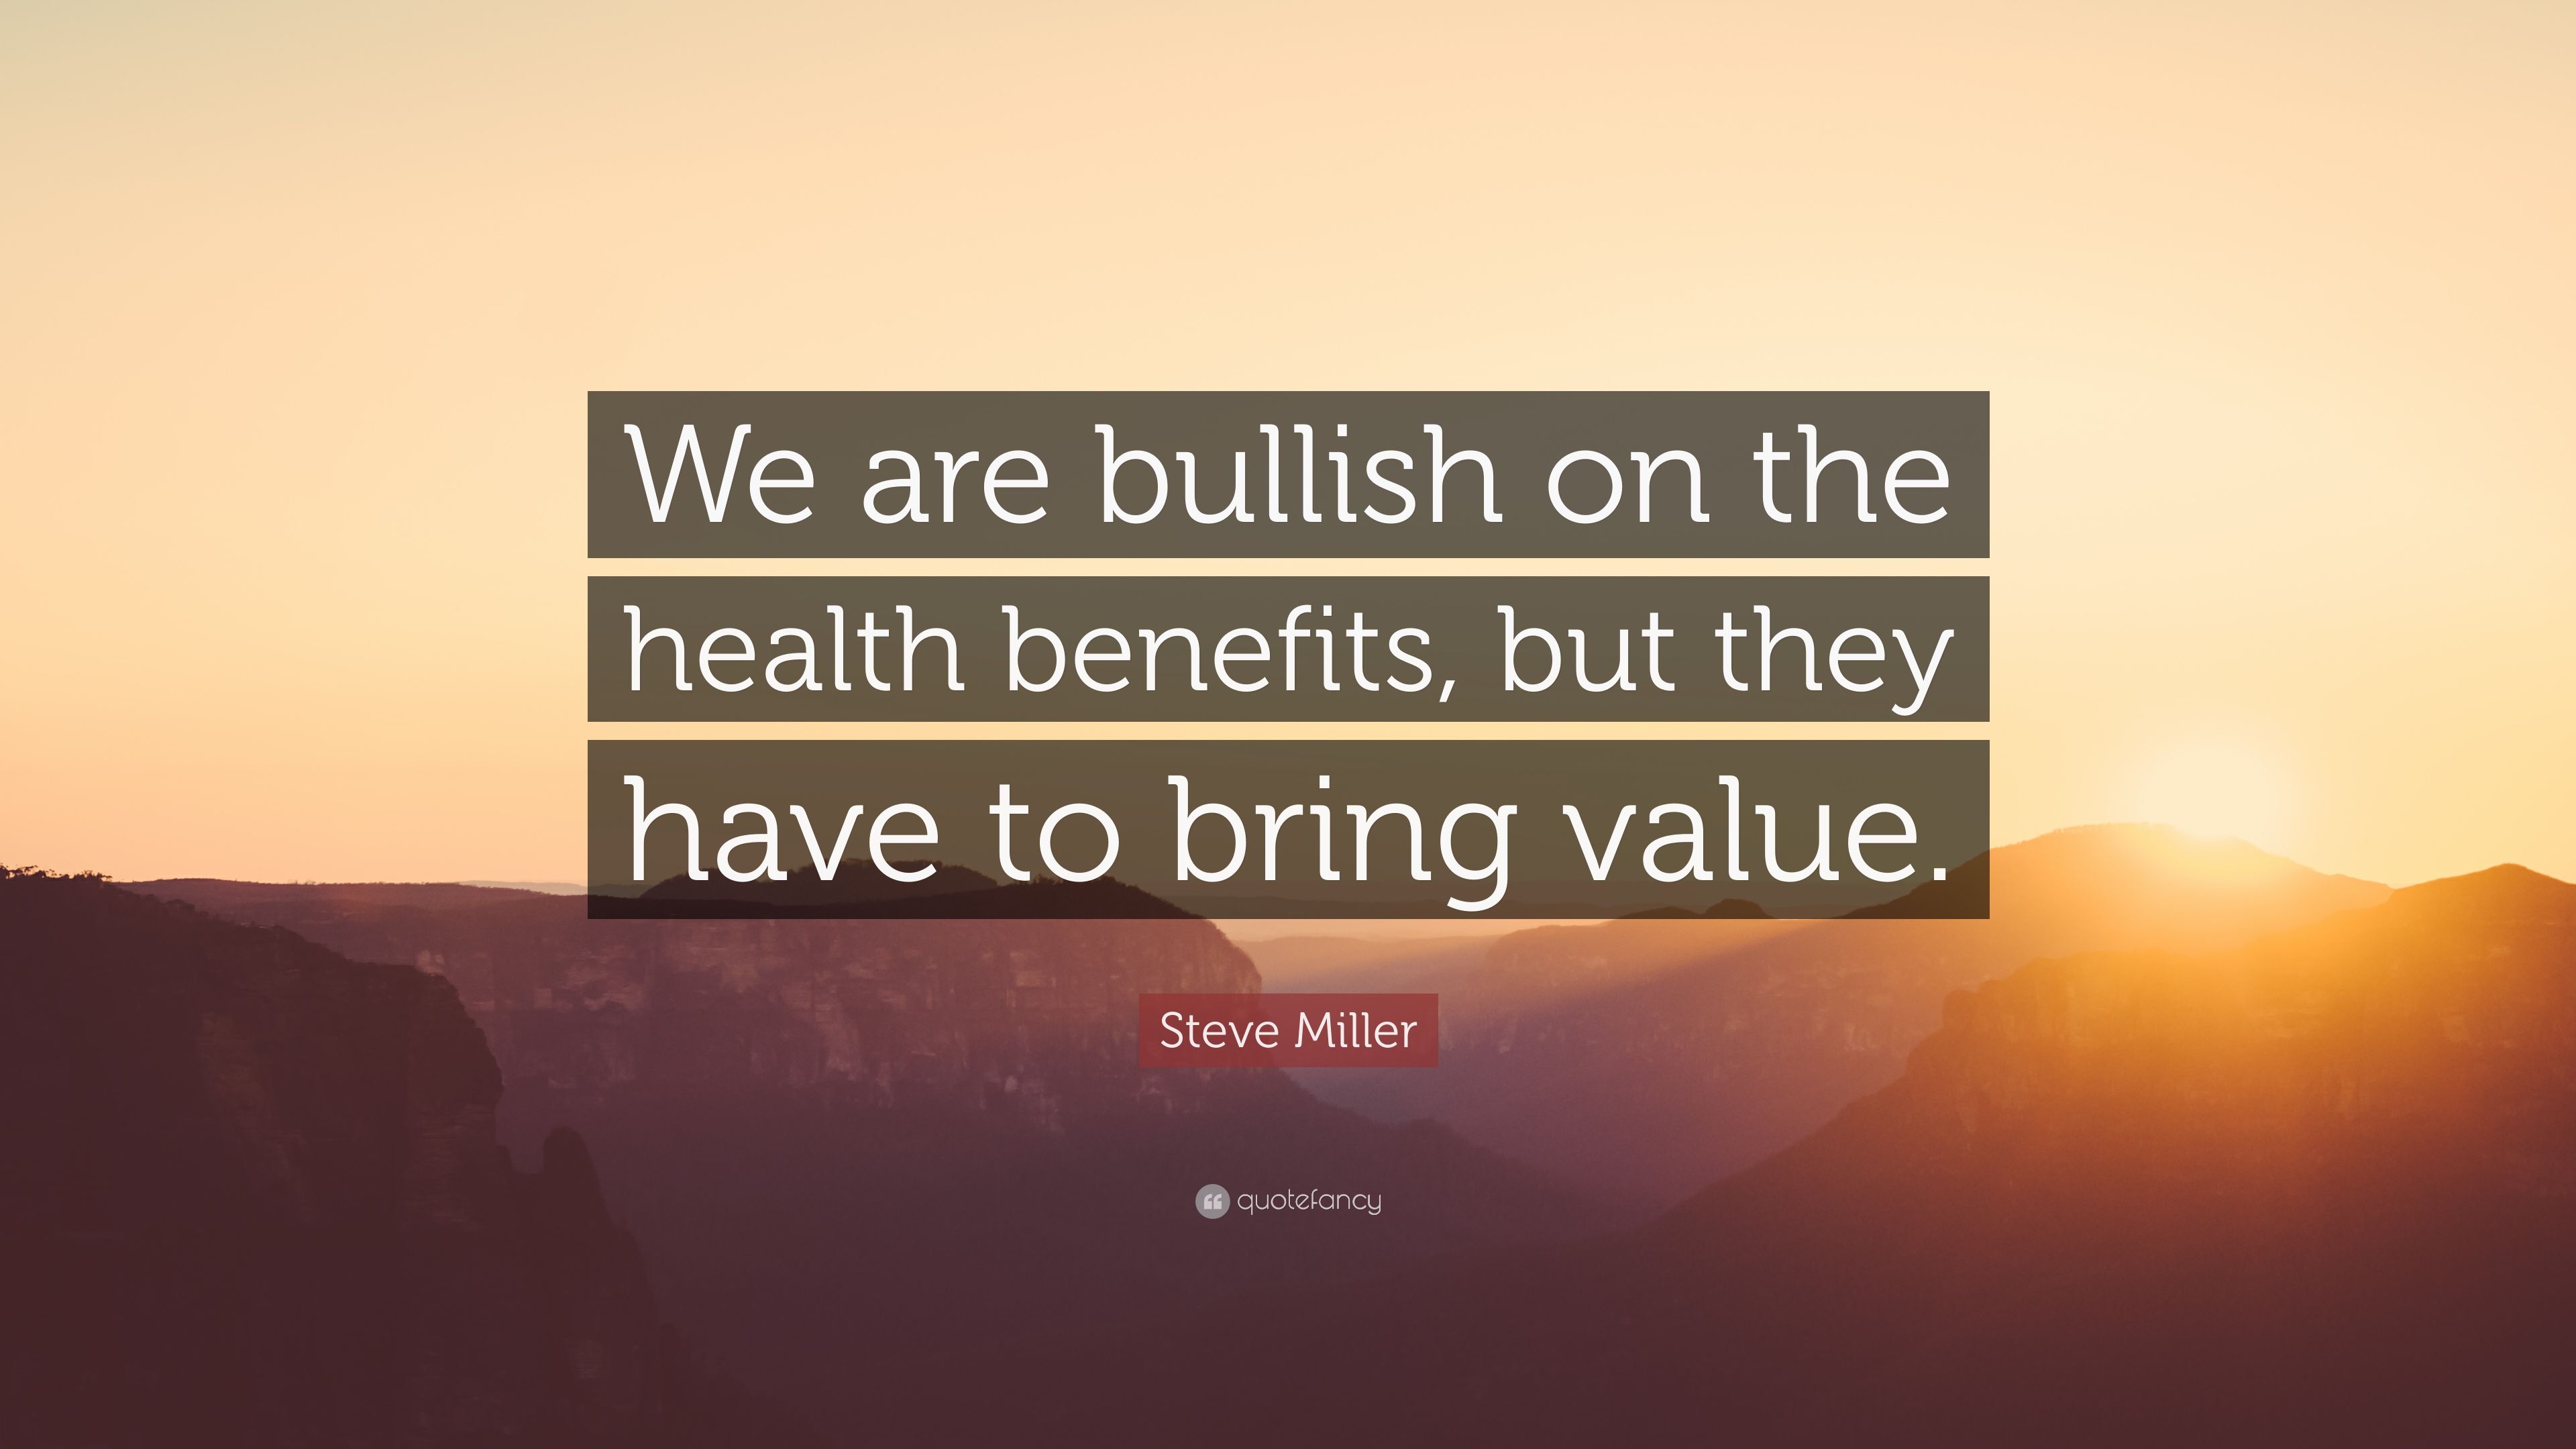 Steve Miller Quote: “We are bullish on the health benefits, but they have to bring value.” (7 wallpaper)